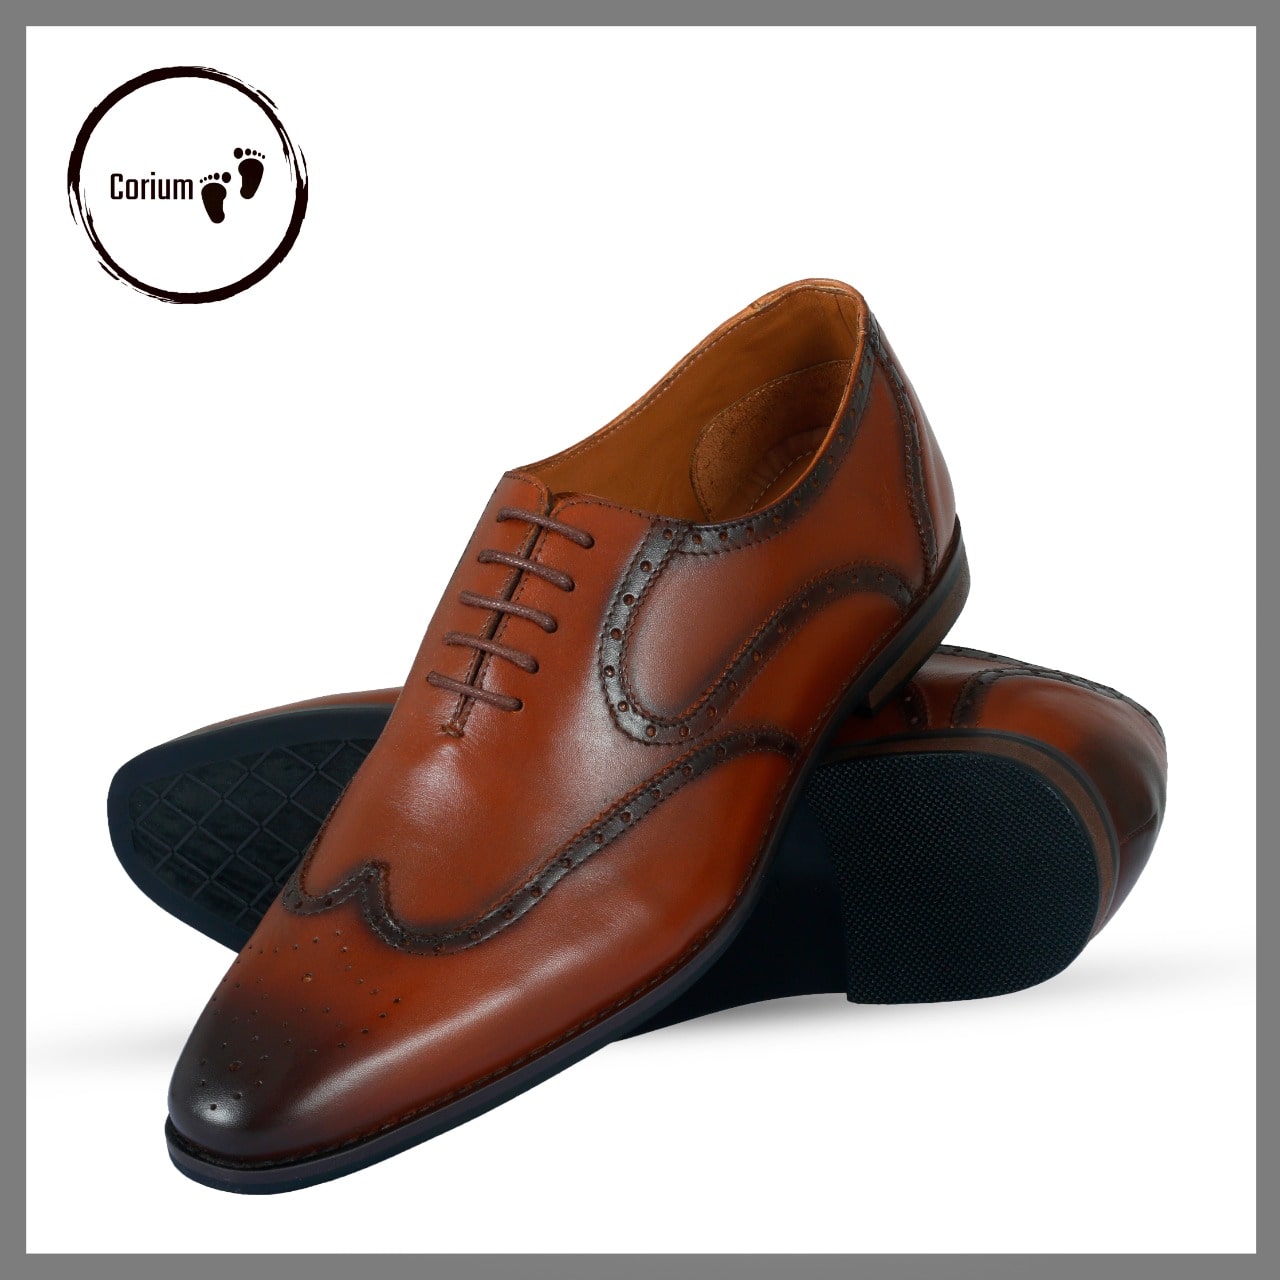 World wide Oppose Tahiti CRM 31 - Classy oxford Formal shoe | leather shoes collection